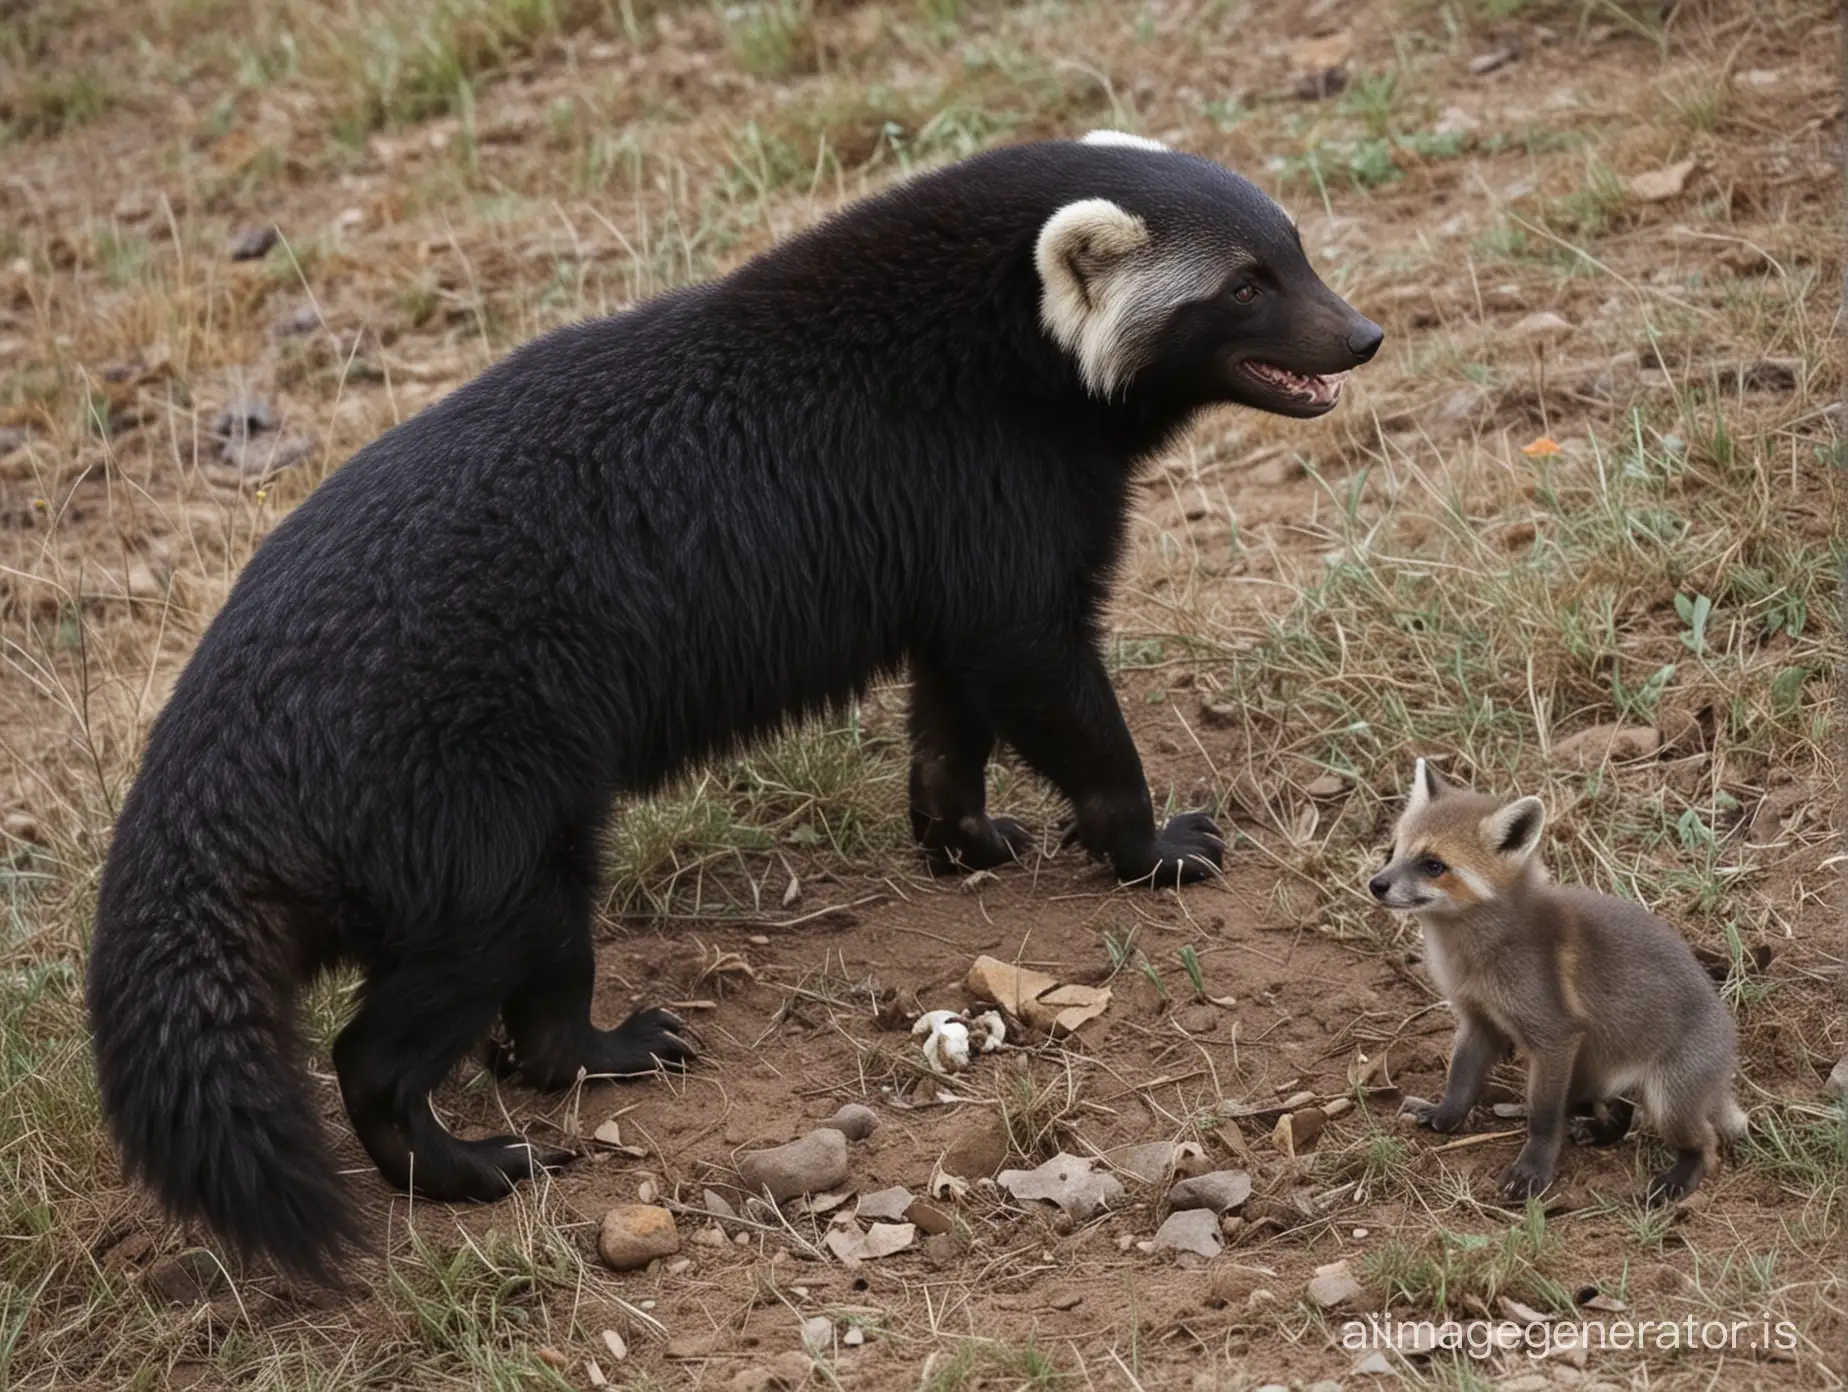 An African honey badger came to Russia and befriended a dog, a fox, and an owl.